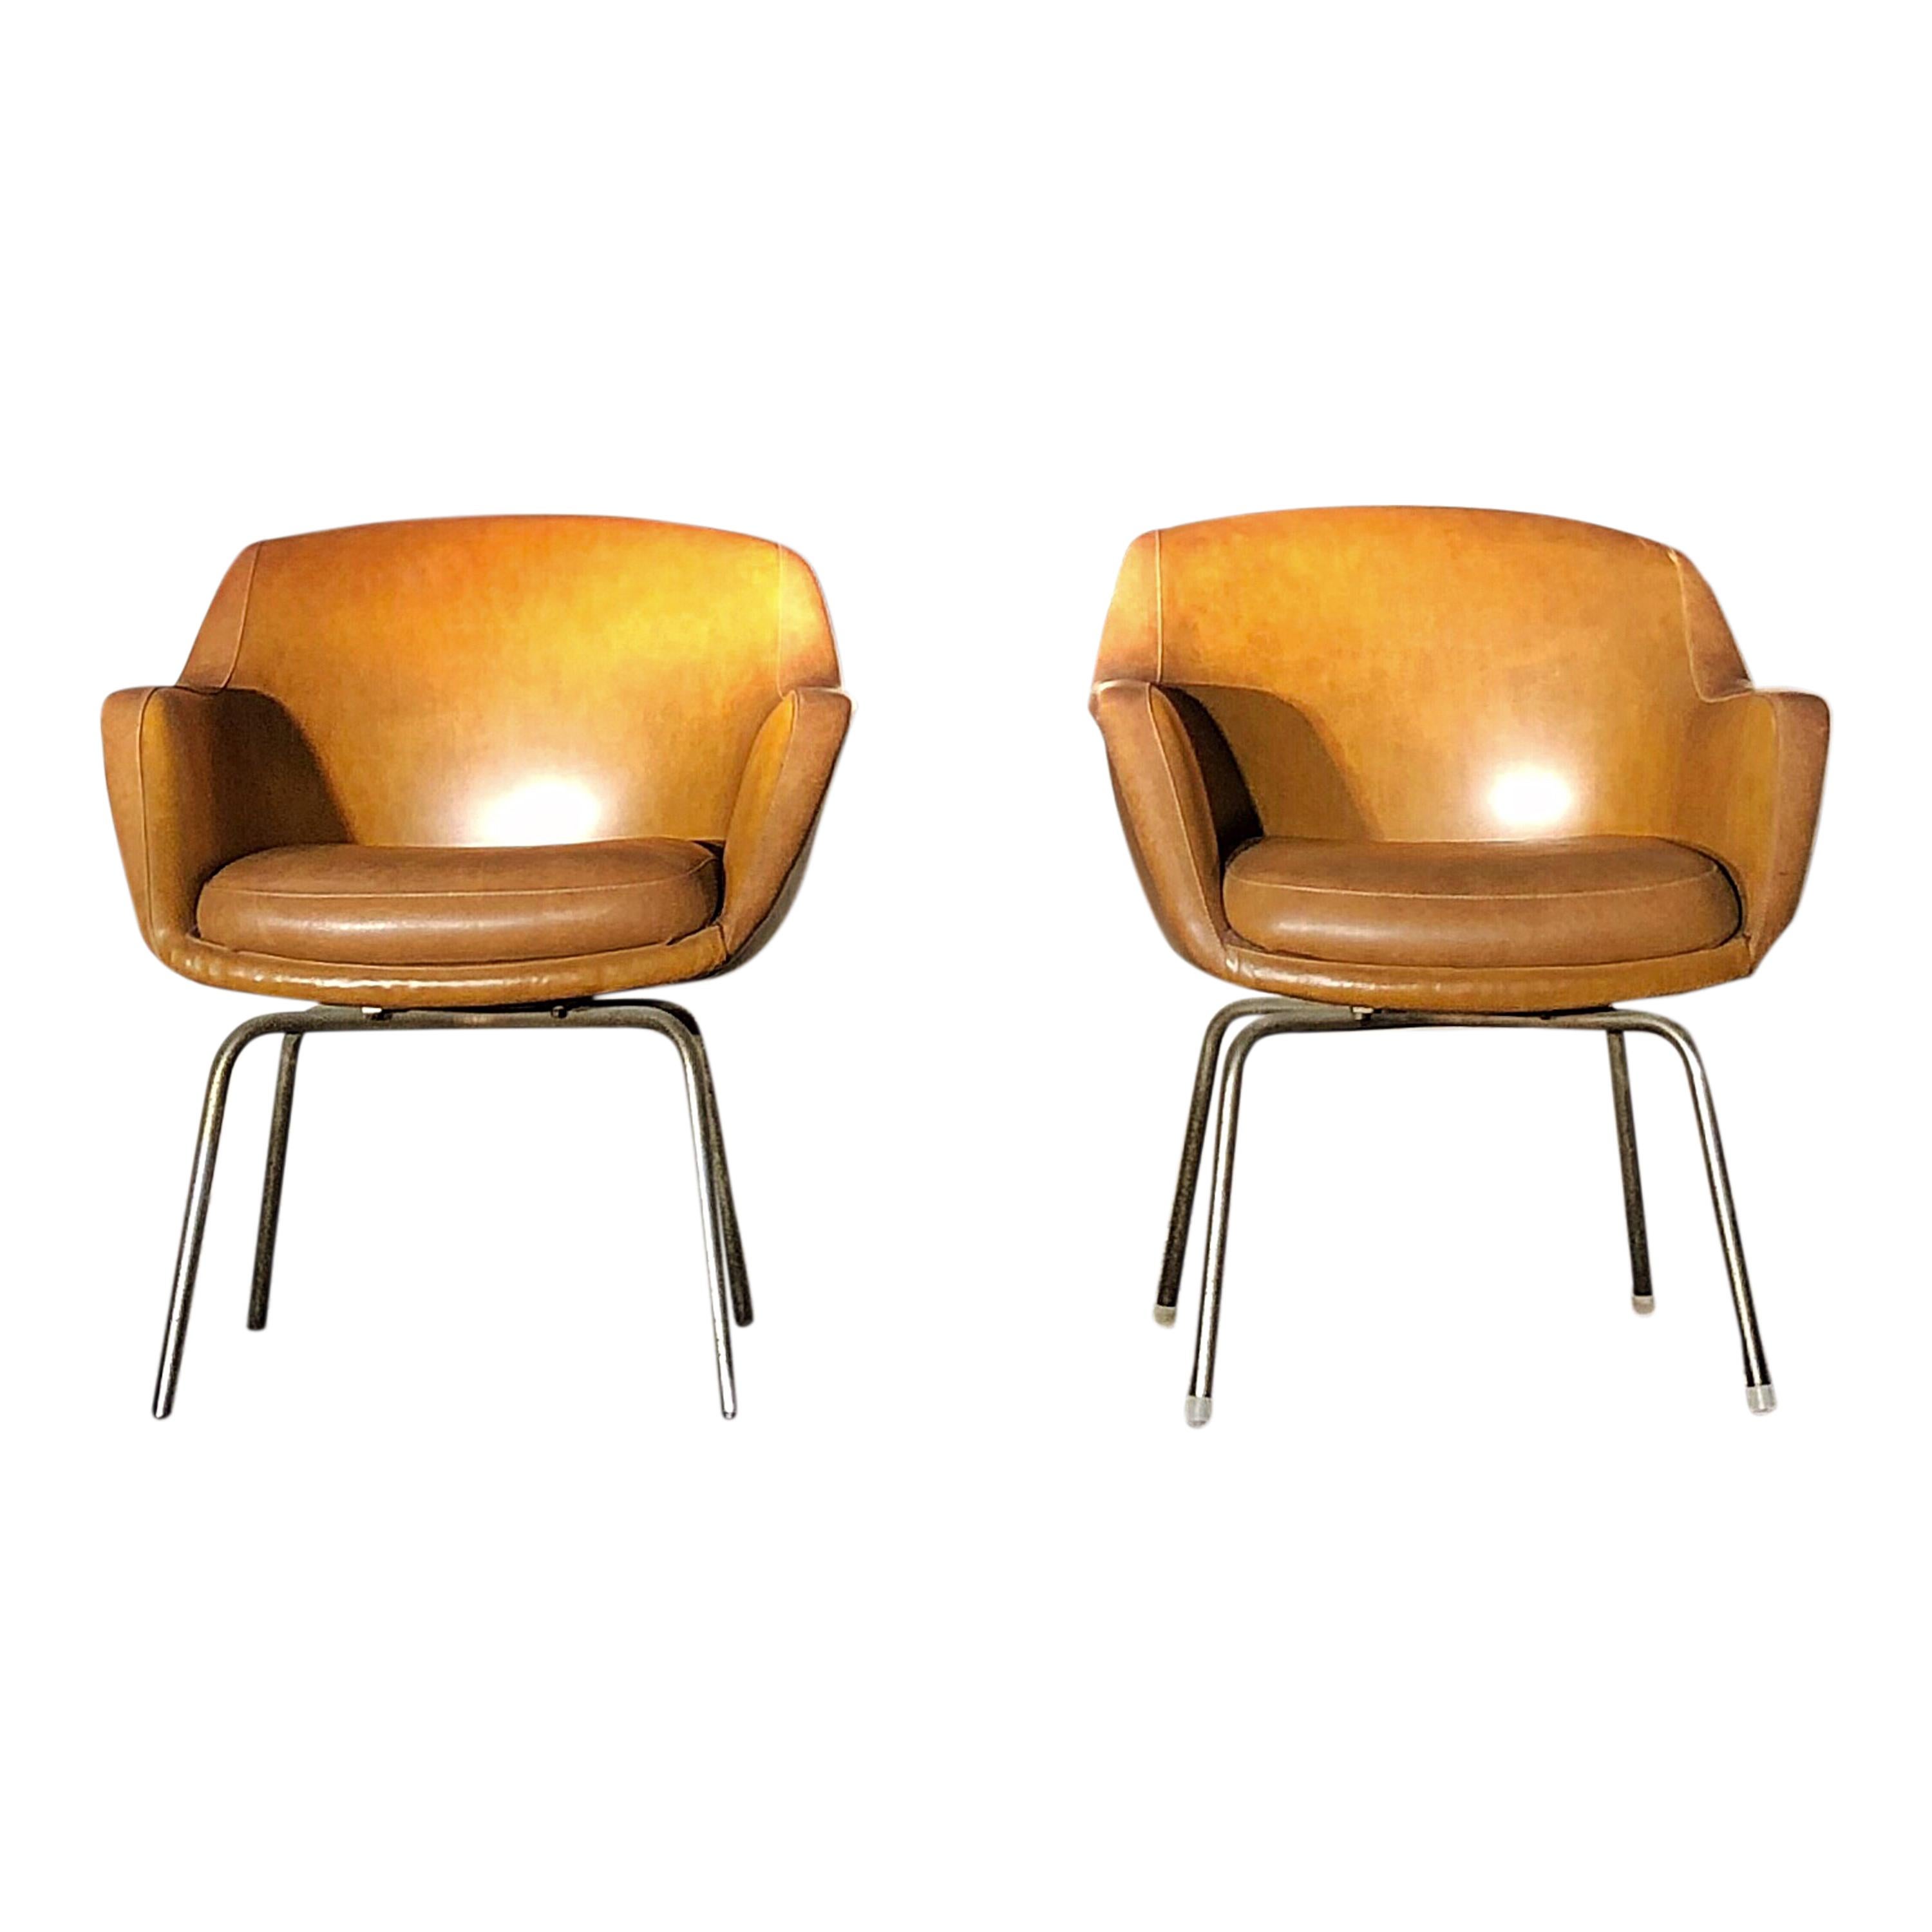 Mid-Century Modern Pair of Midcentury Brown Leather Armchairs in the Style of Arne Jacobsen, 1960s For Sale